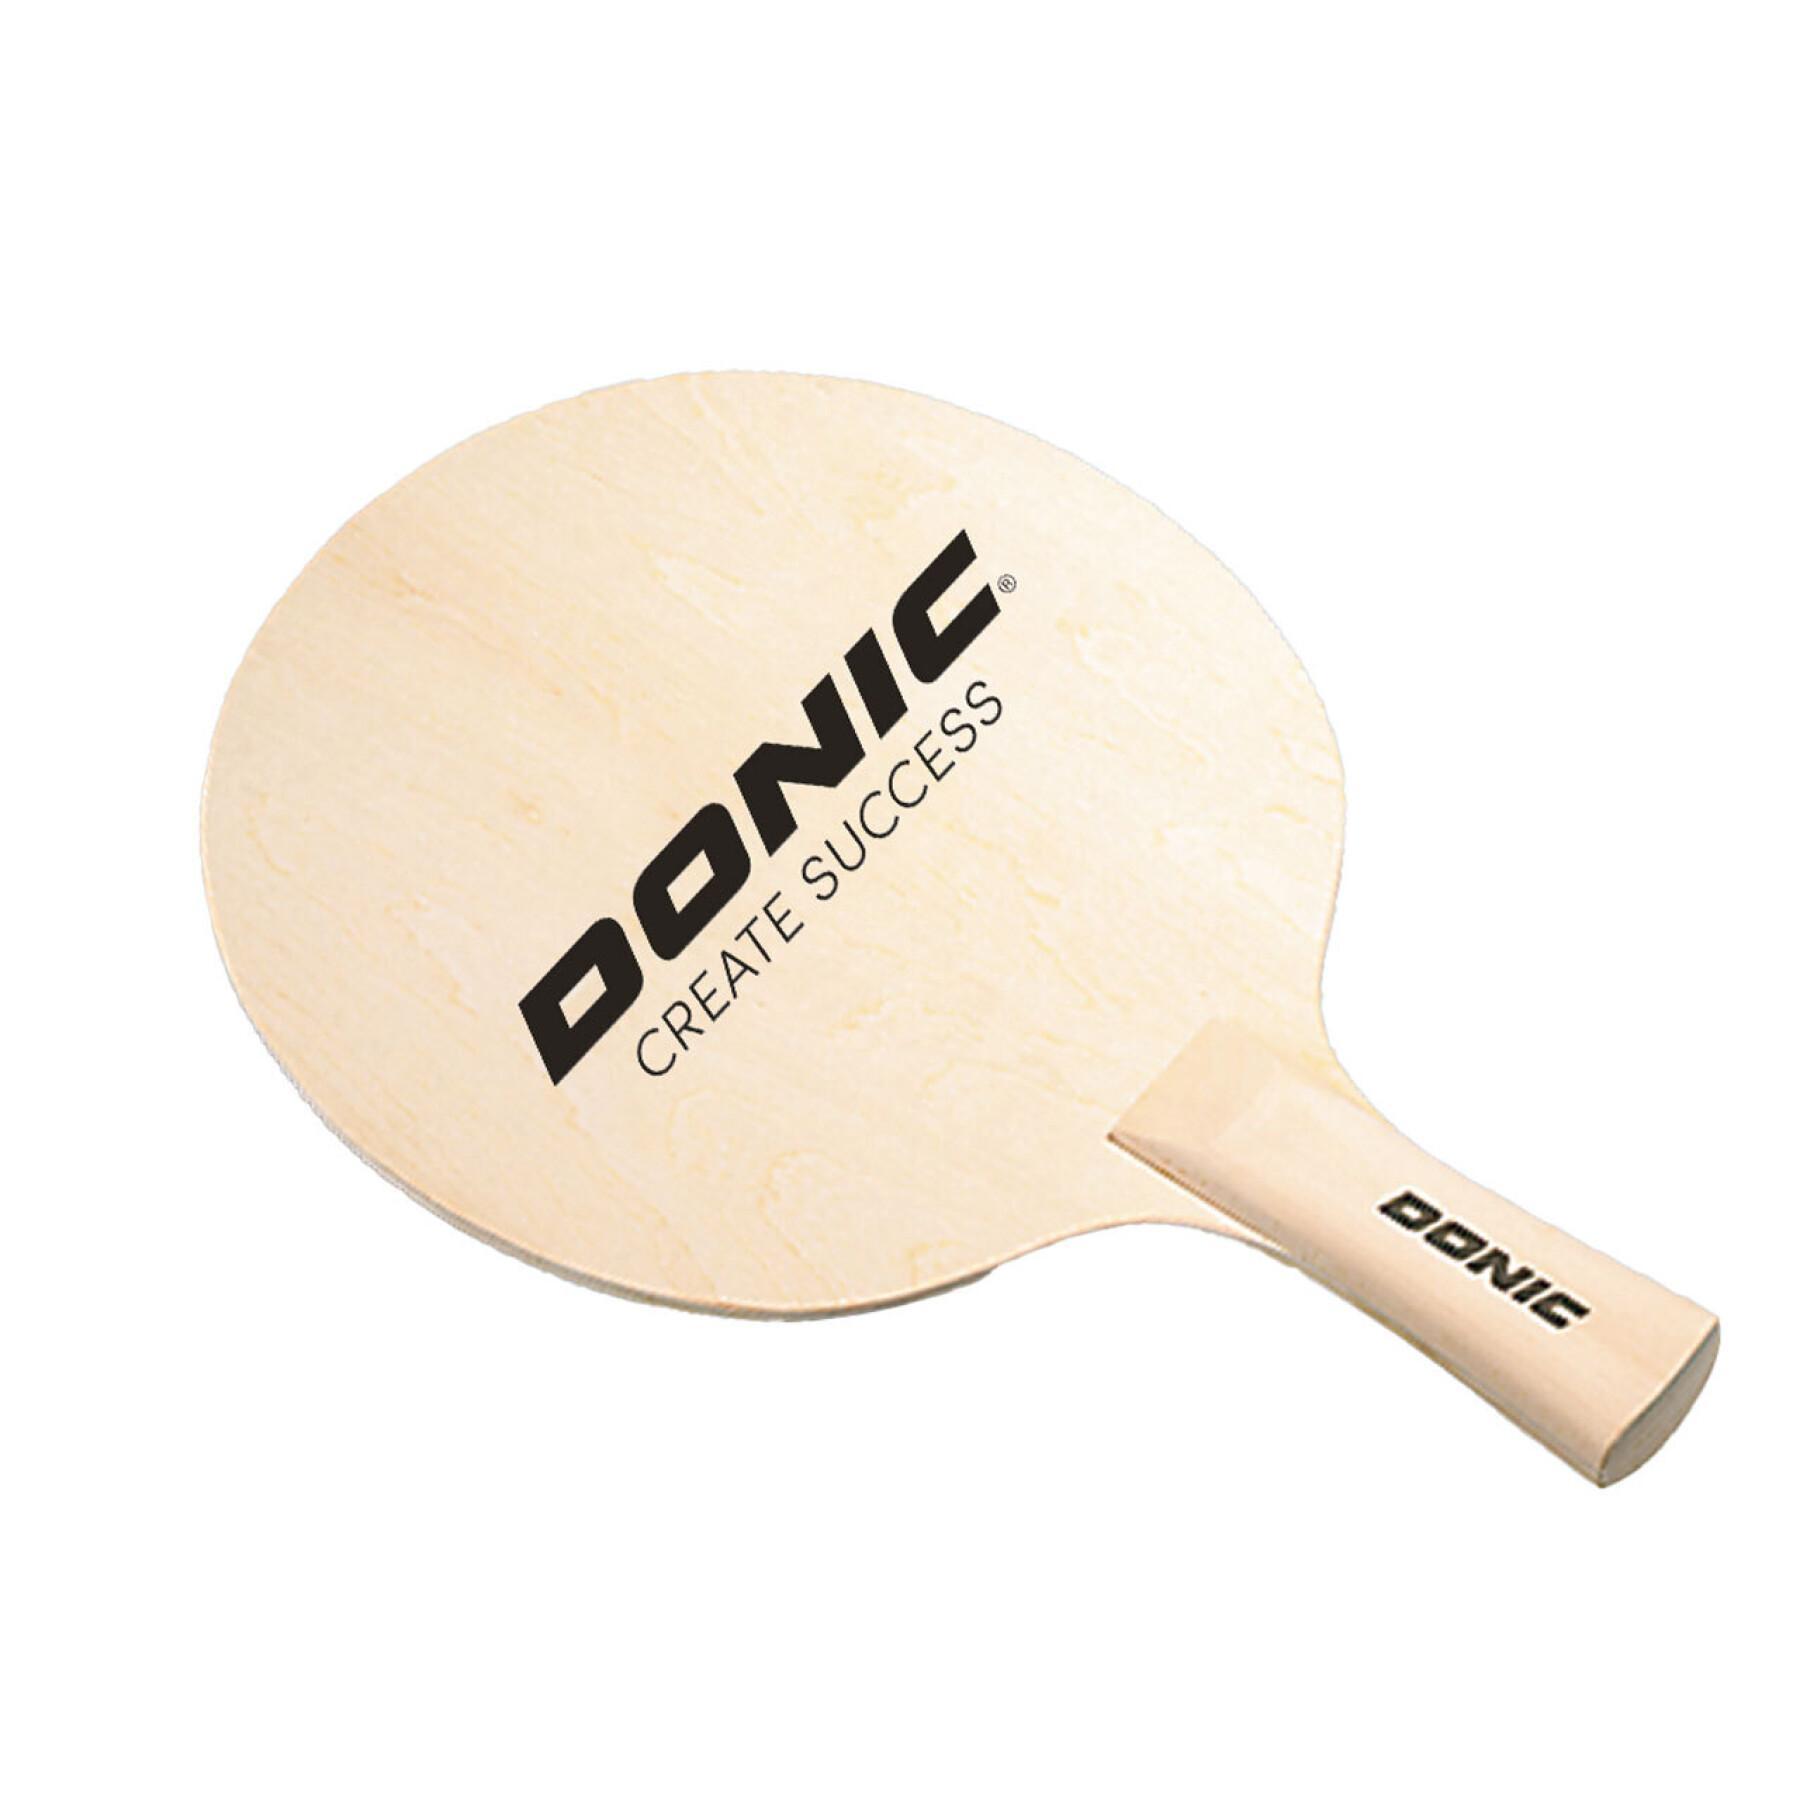 Wooden table tennis racket Donic